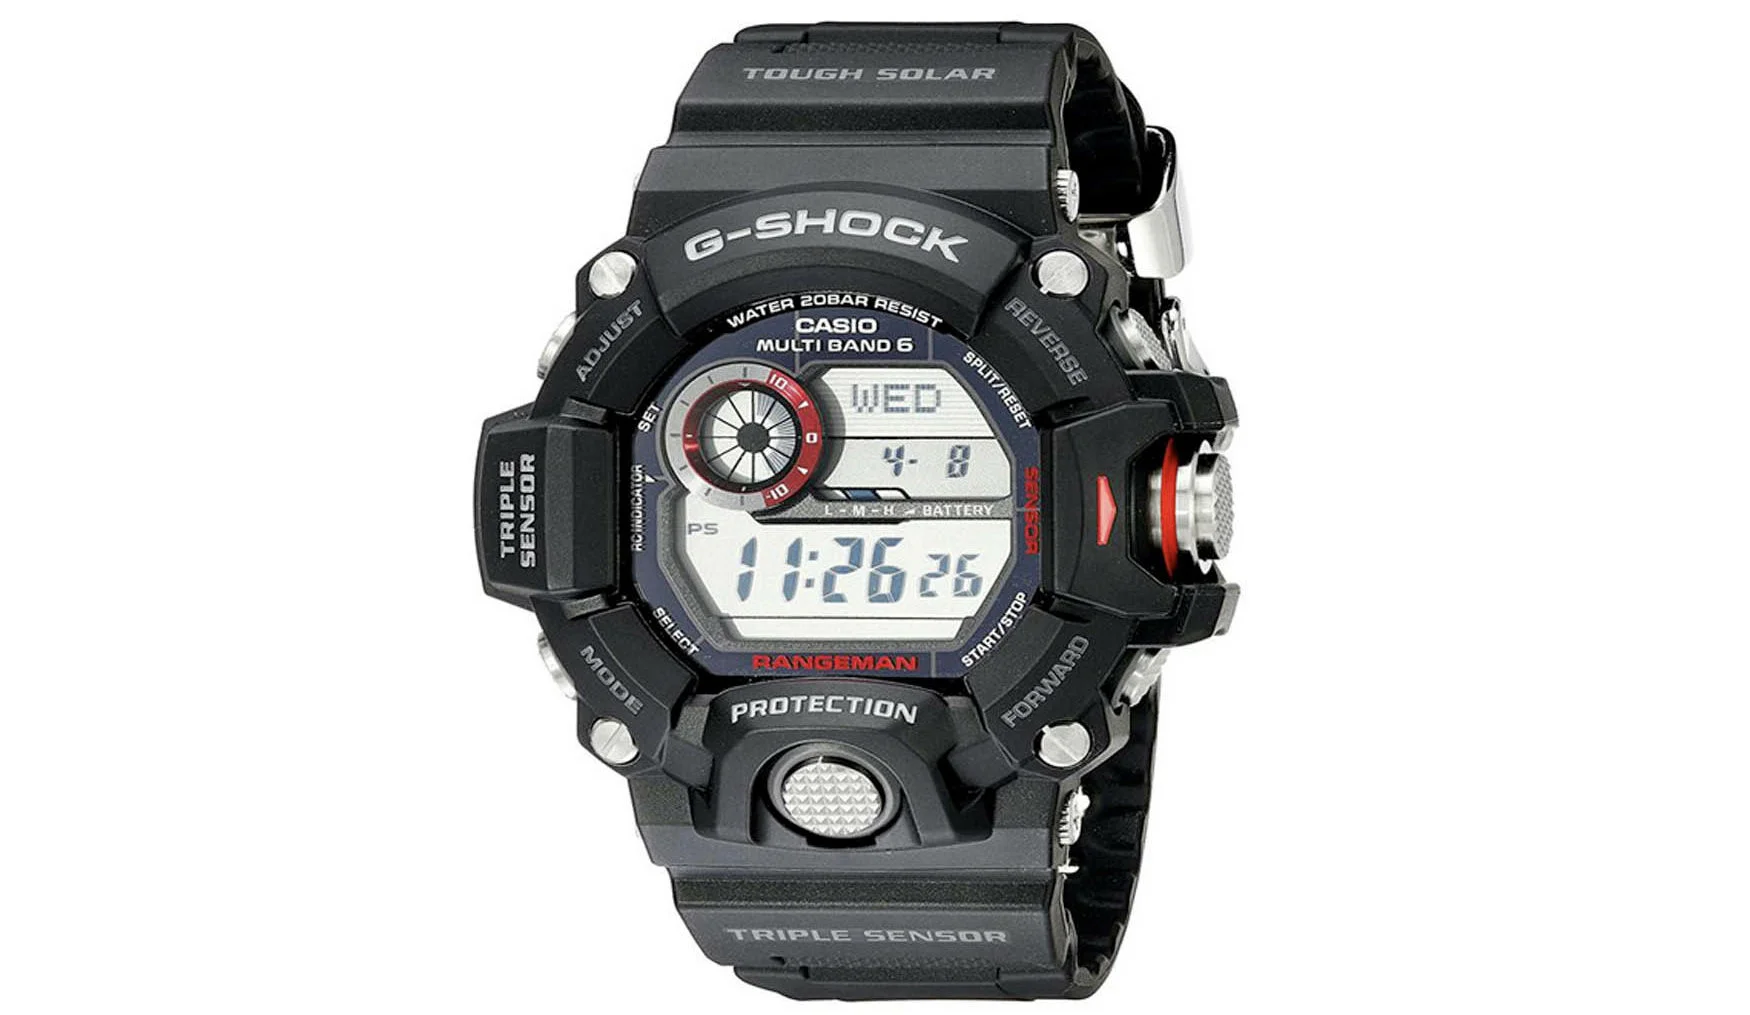 PRO - 4 POWER TACTICAL SURVIVAL WATCH : water resistant BRAND NEW IN BOX |  Tactical survival, Survival watch, Survival